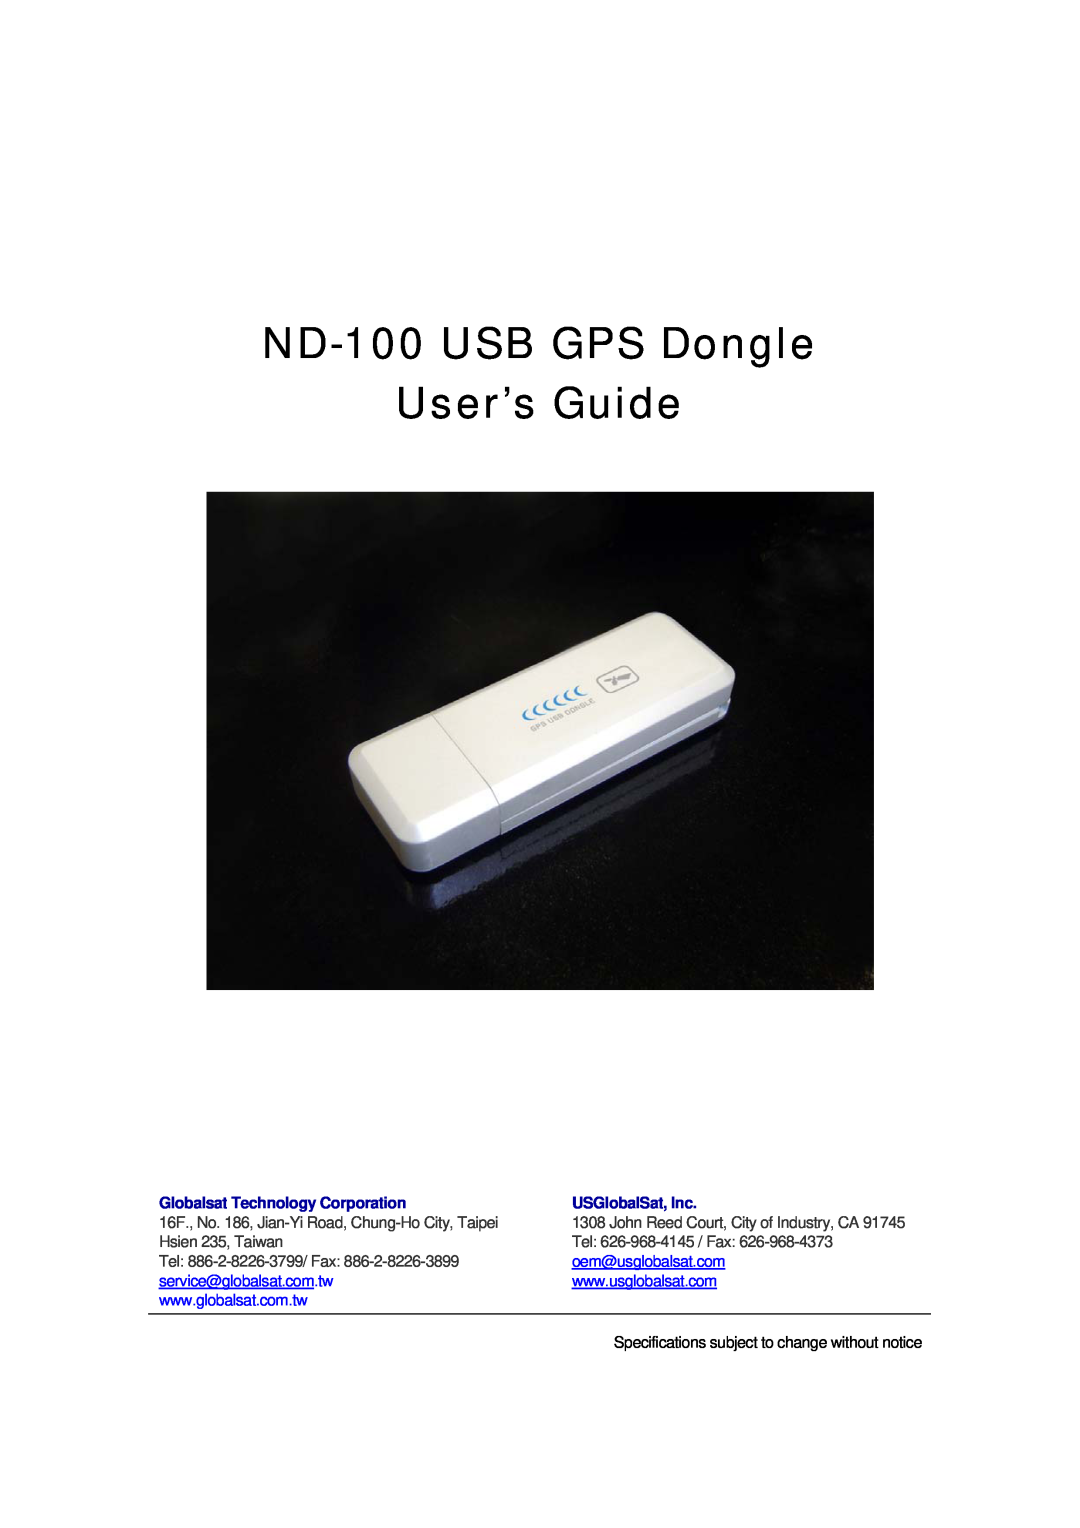 Globalsat Technology specifications ND-100 USB GPS Dongle User’s Guide, Globalsat Technology Corporation 